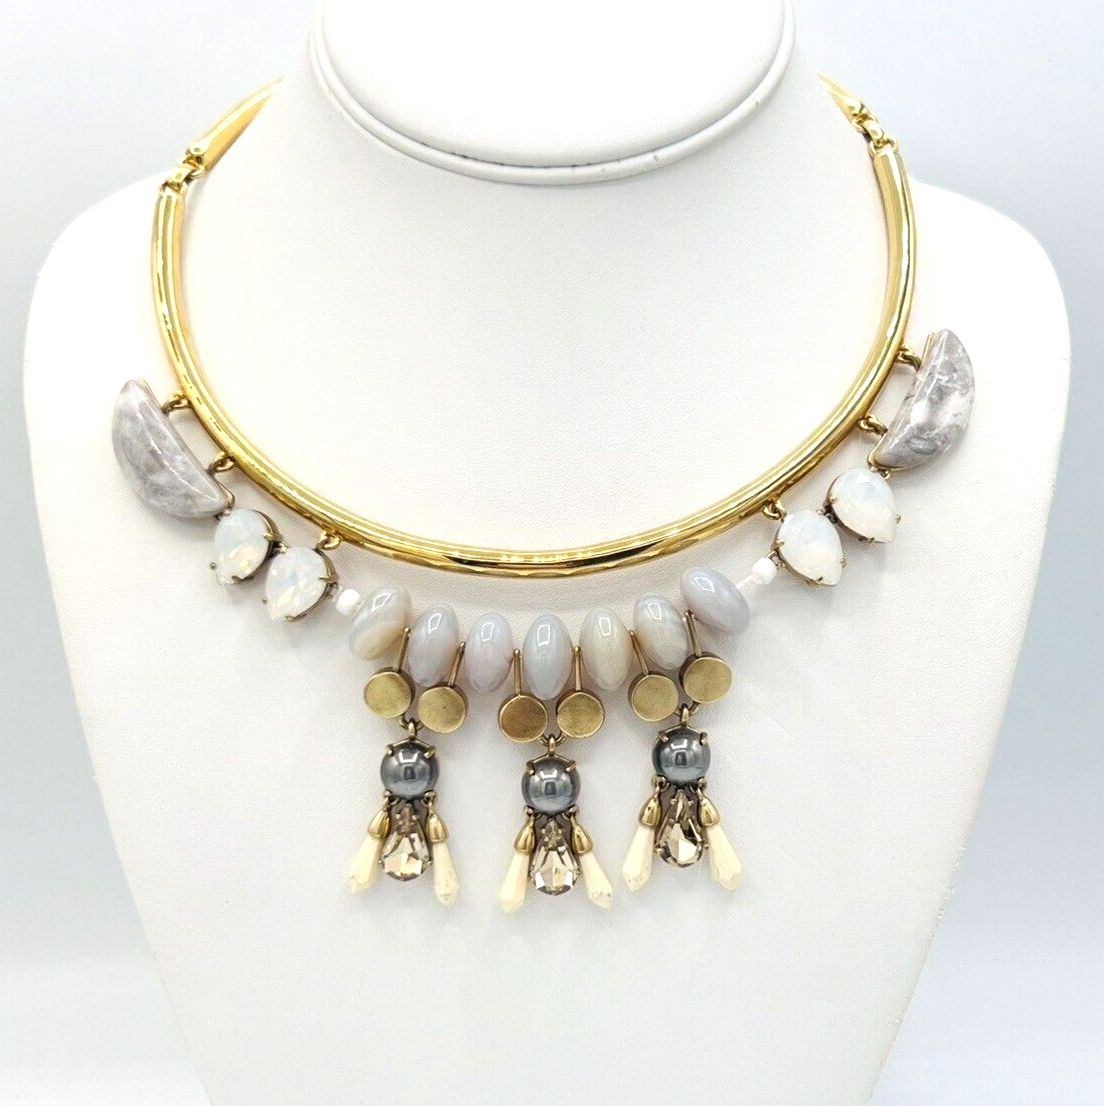 Primary image for J Crew Gold Tone Beaded Choker Collar Necklace